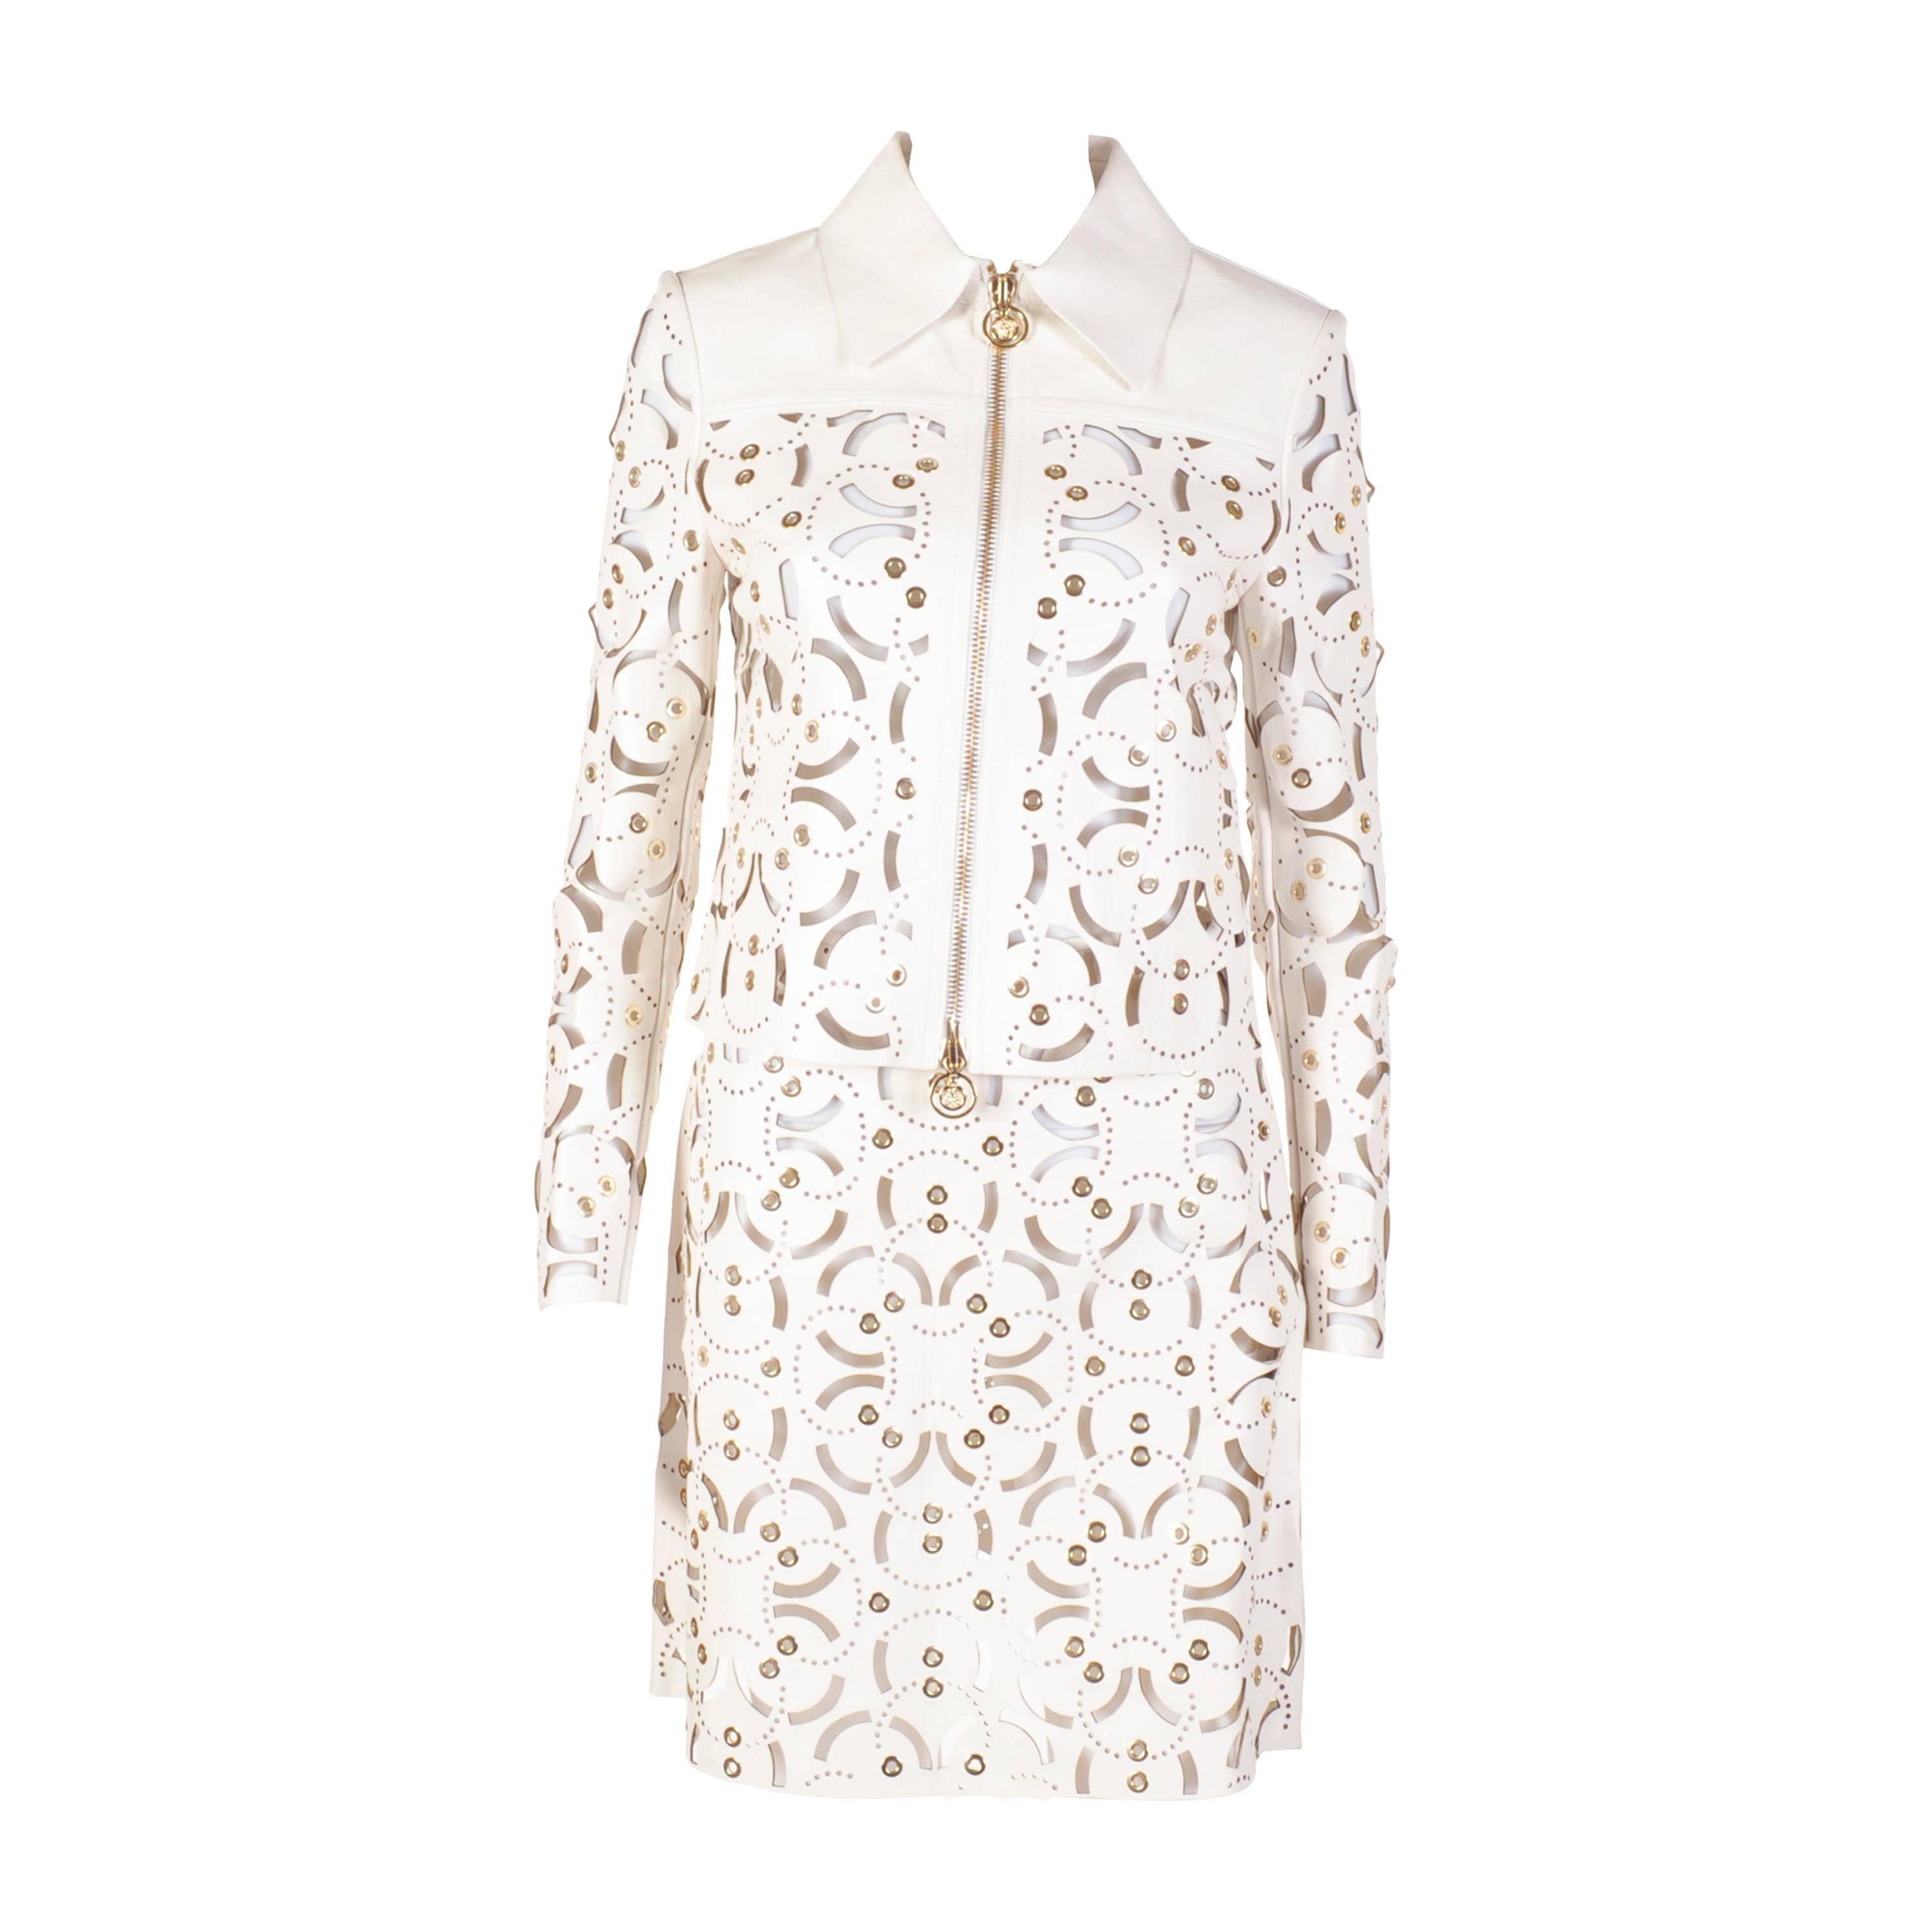 S/S 15 look#25 VERSACE WHITE LASER CUT LEATHER JACKET SKIRT SUIT as seen on Katy